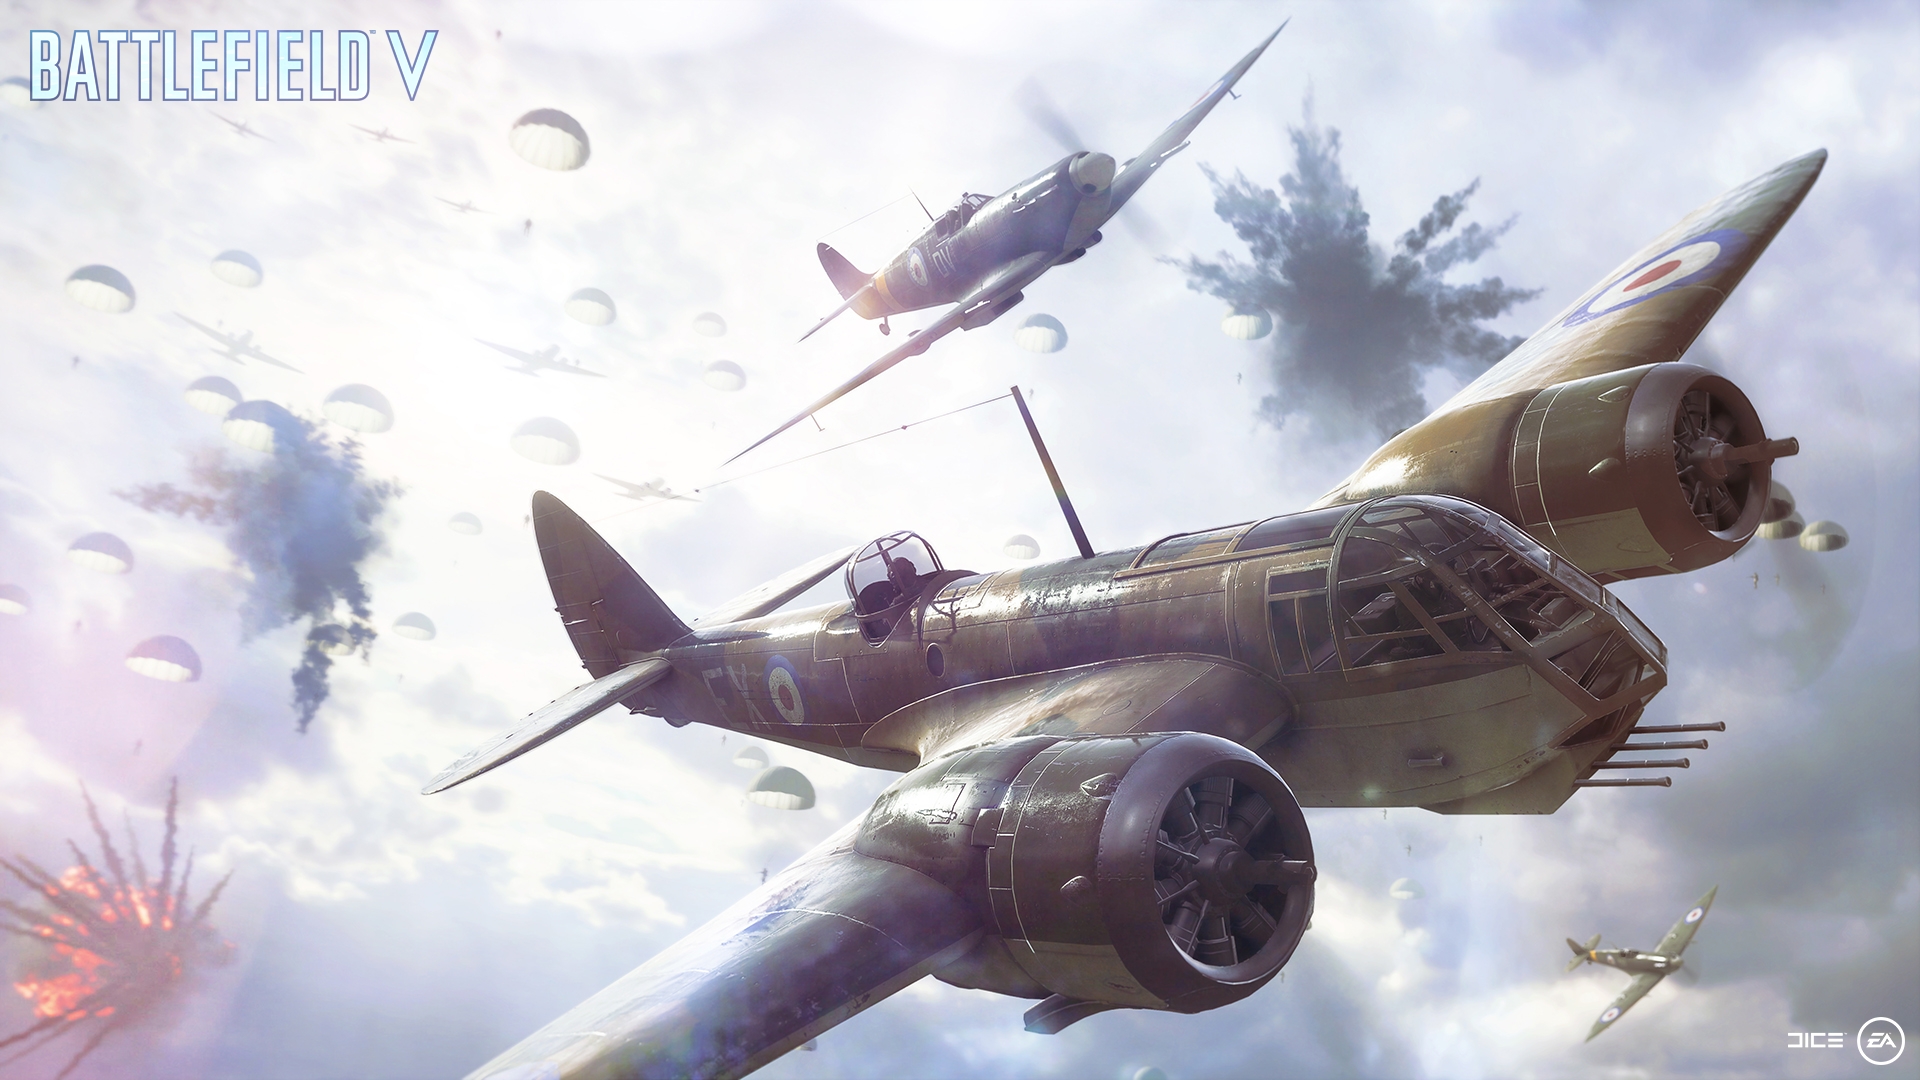 General 1920x1080 Battlefield V video games world war army air force EA DICE Electronic Arts Supermarine Supermarine Spitfire British aircraft first-person shooter